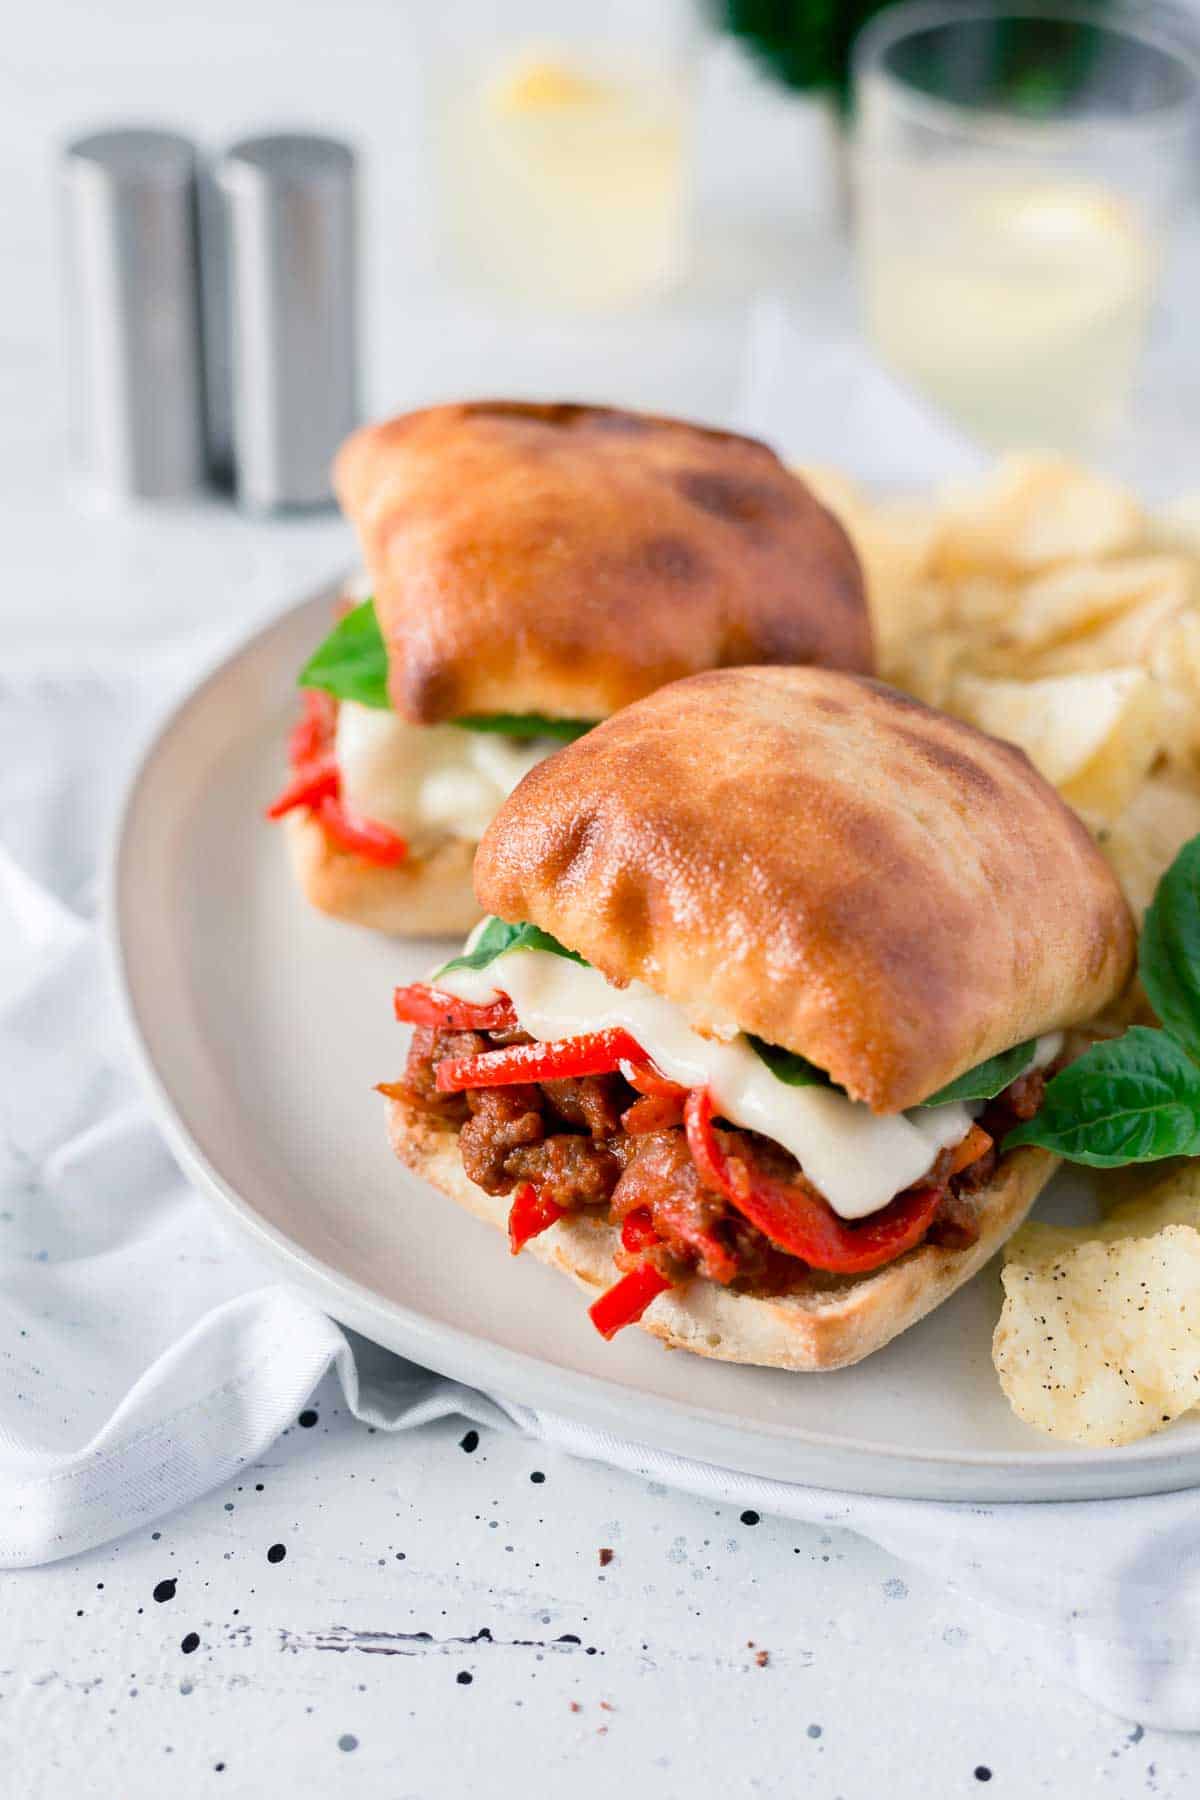 These Sausage and Peppers Sloppy Joes are some serious comfort food! They’re super easy to make, all you’ll need is just 25 minutes!